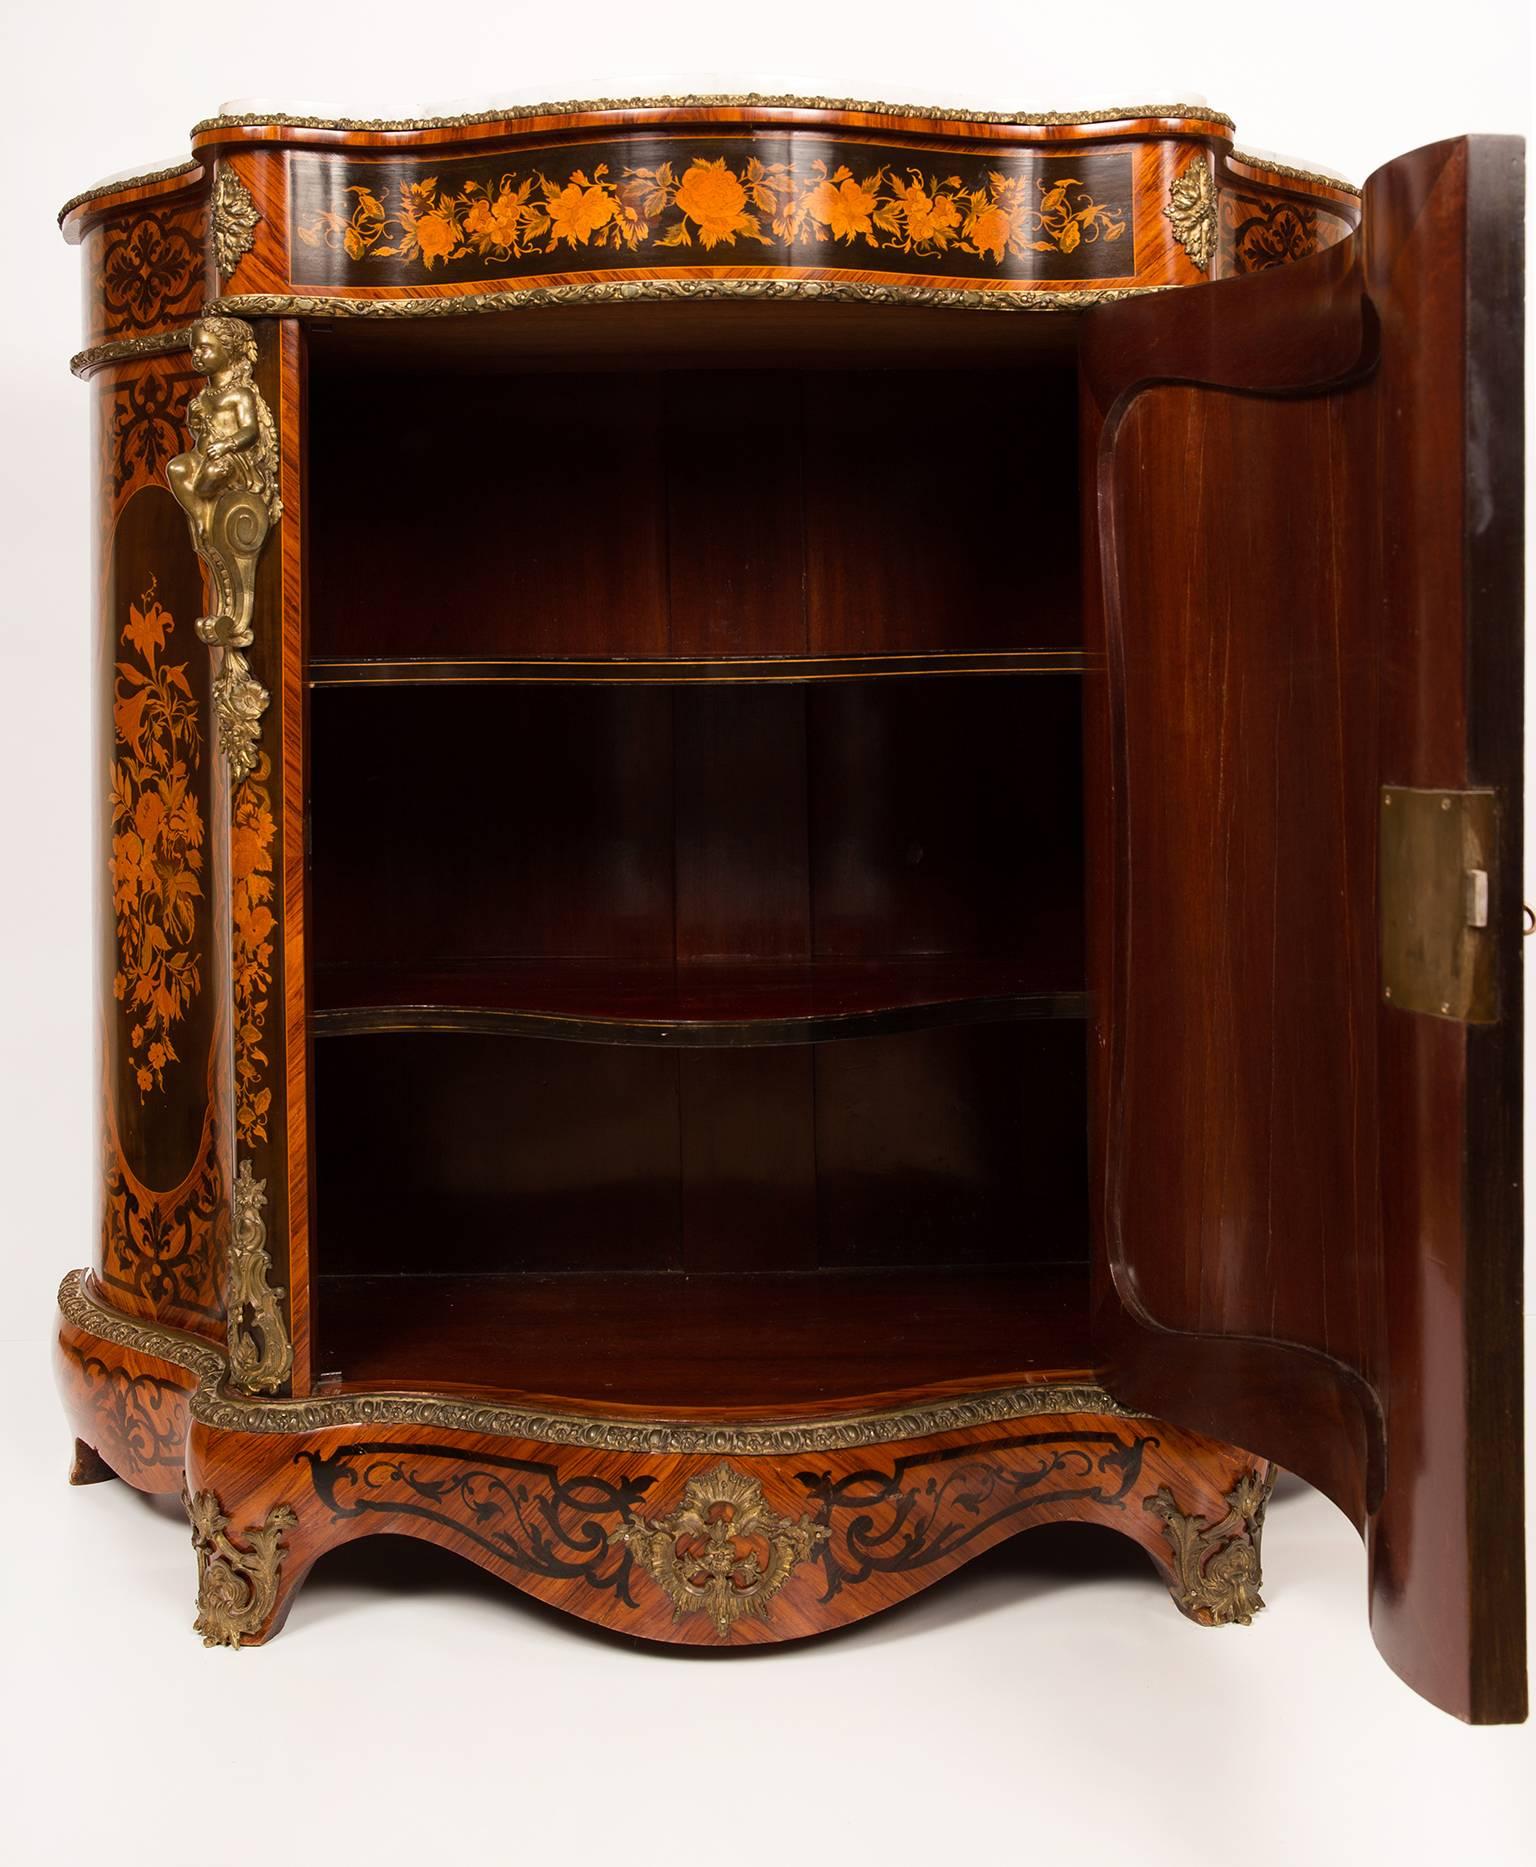 Pair of French Serpentine Flower Marquetry Inlaid Meubles D´Appui, circa 1880 For Sale 4